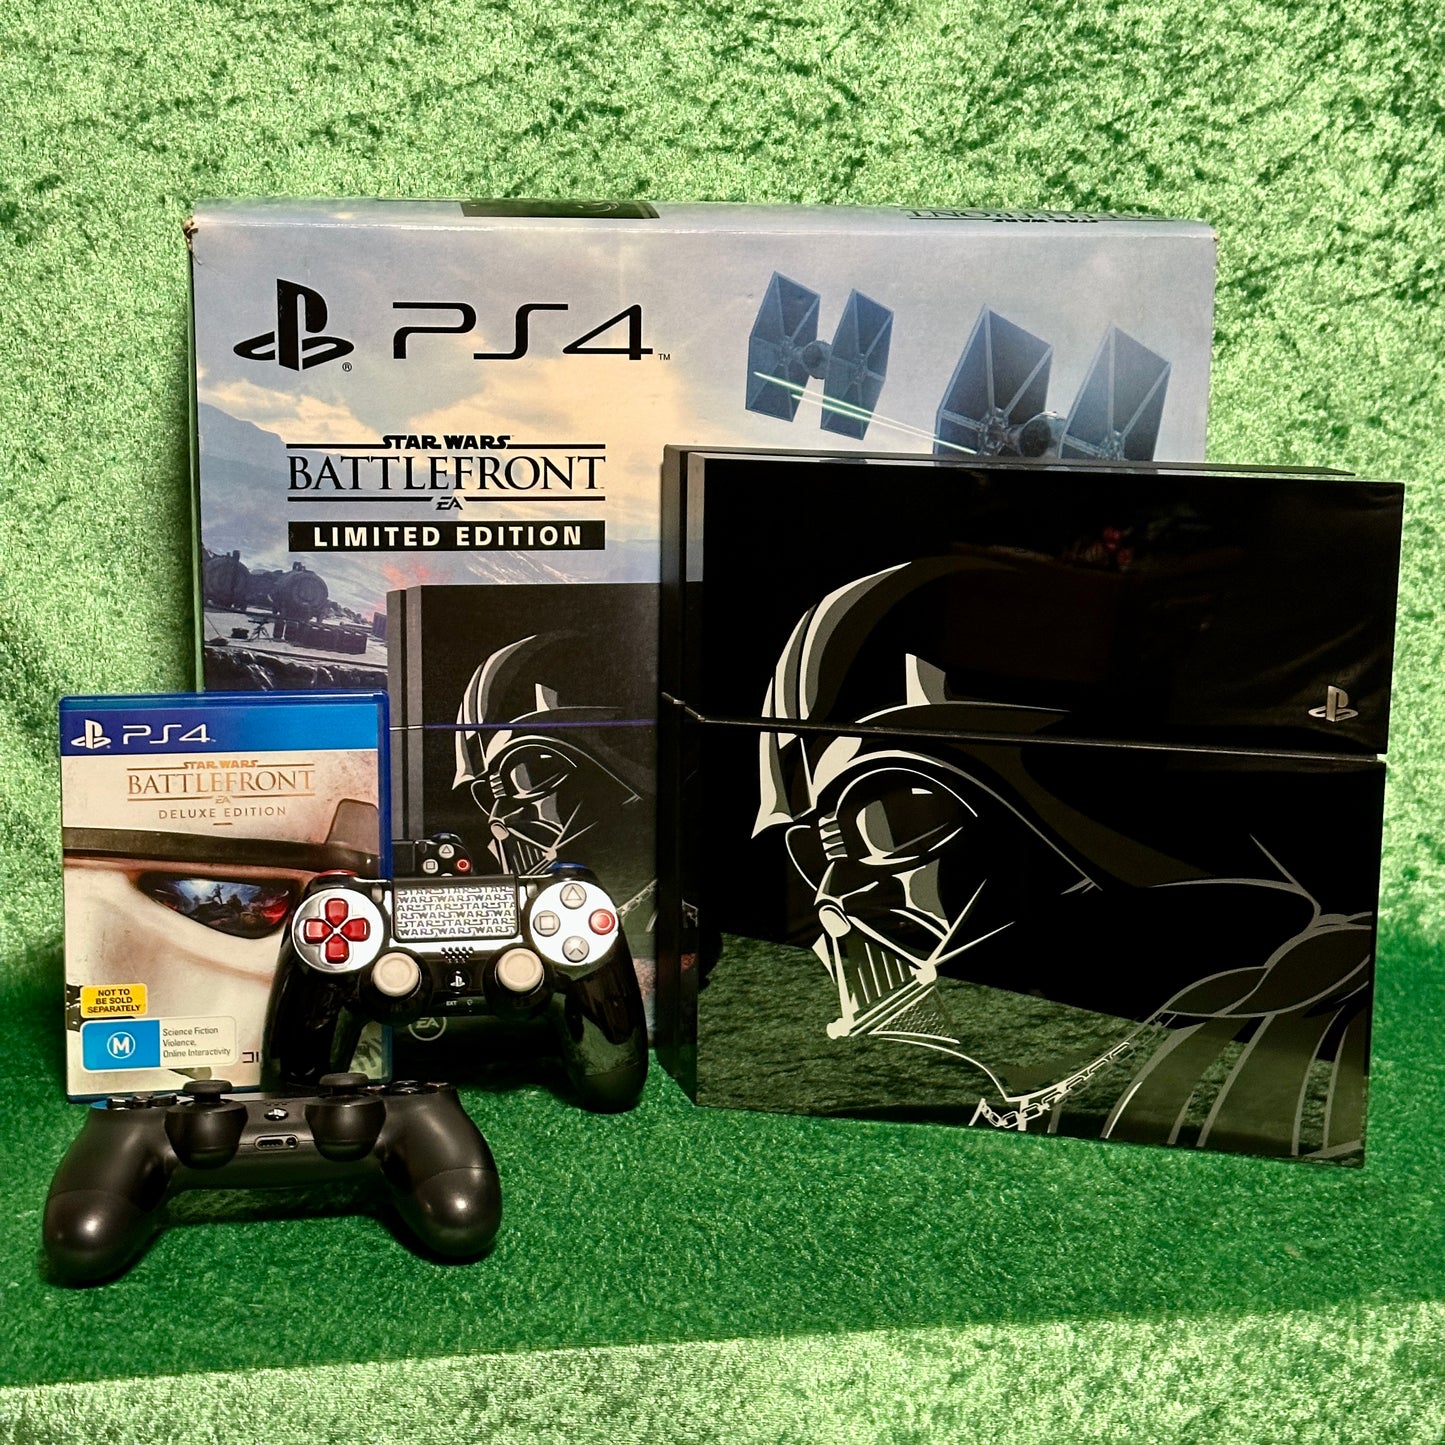 Sony Playstation 4 Battlefront Limited Edition Console